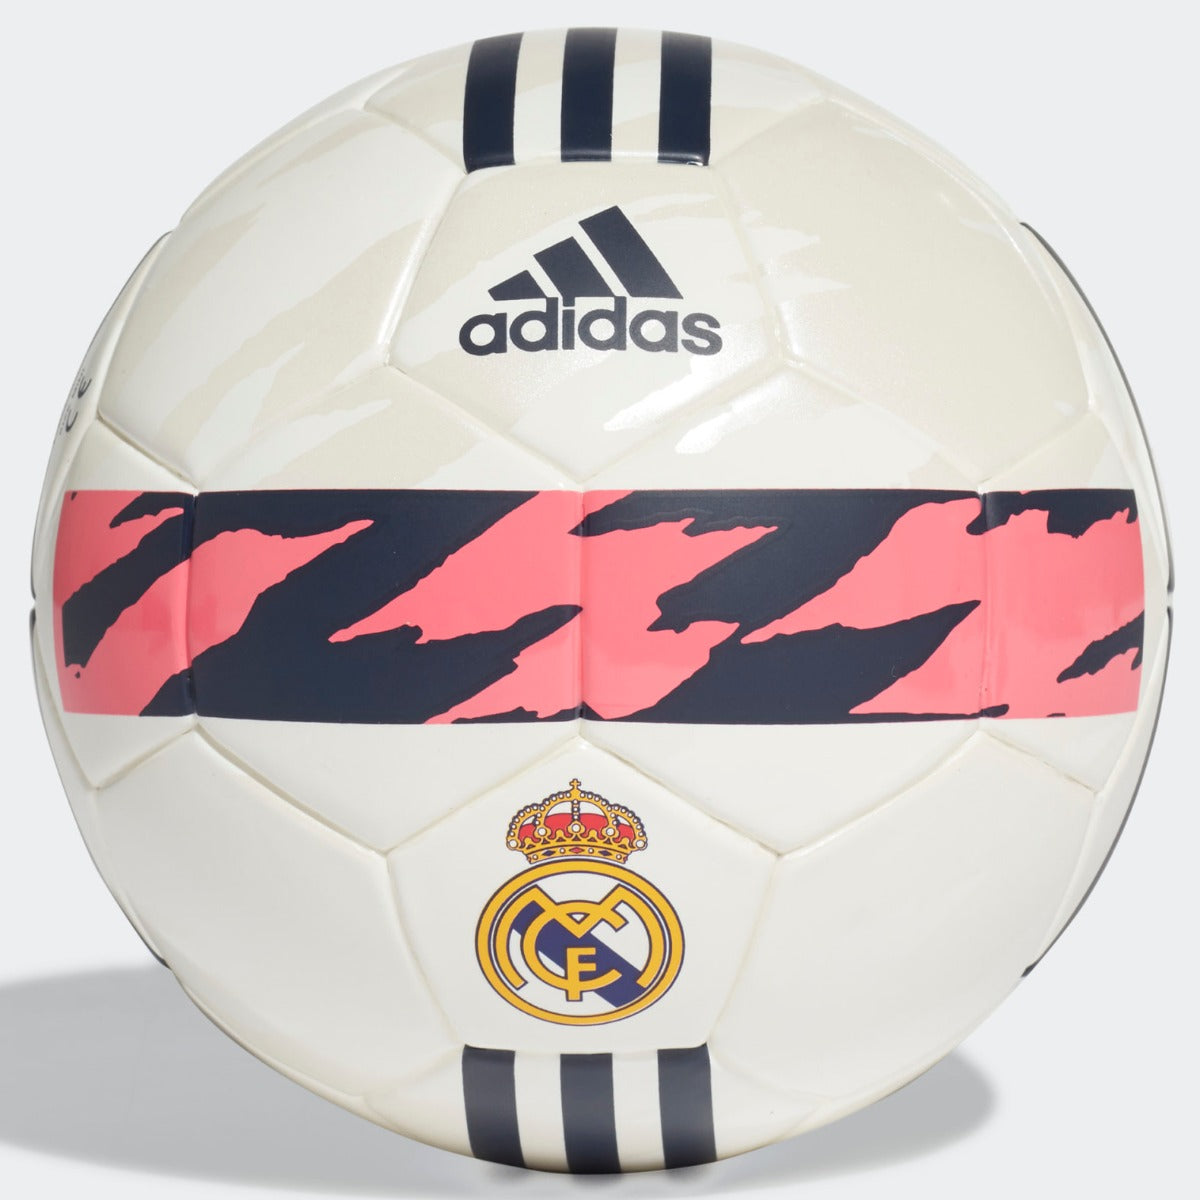 real madrid black and pink jersey